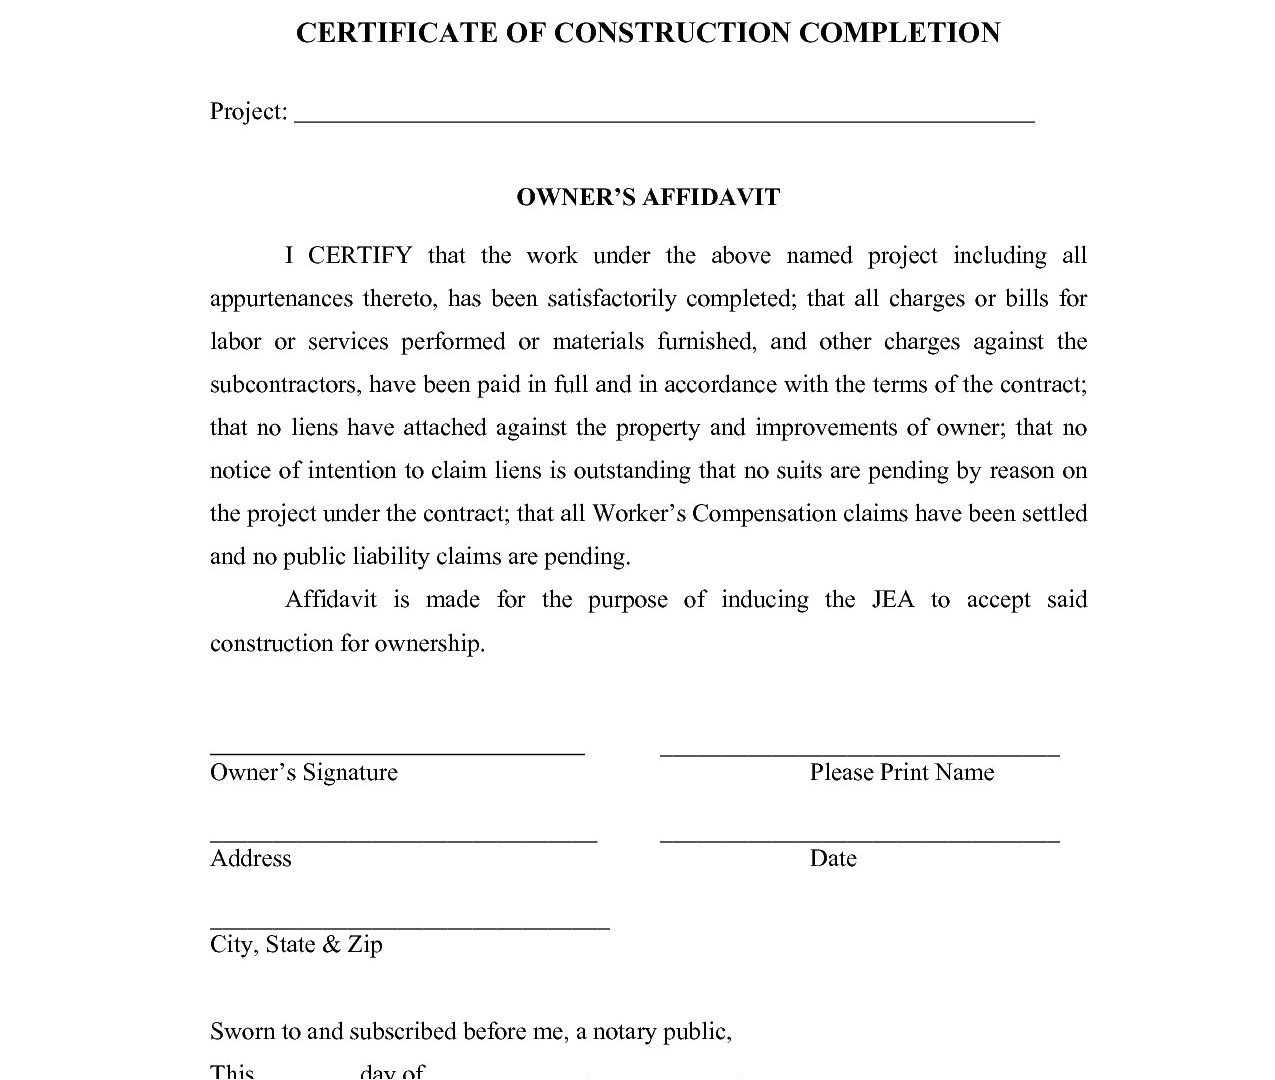 Work Completion Certificate Template – Dalep.midnightpig.co With Regard To Construction Certificate Of Completion Template